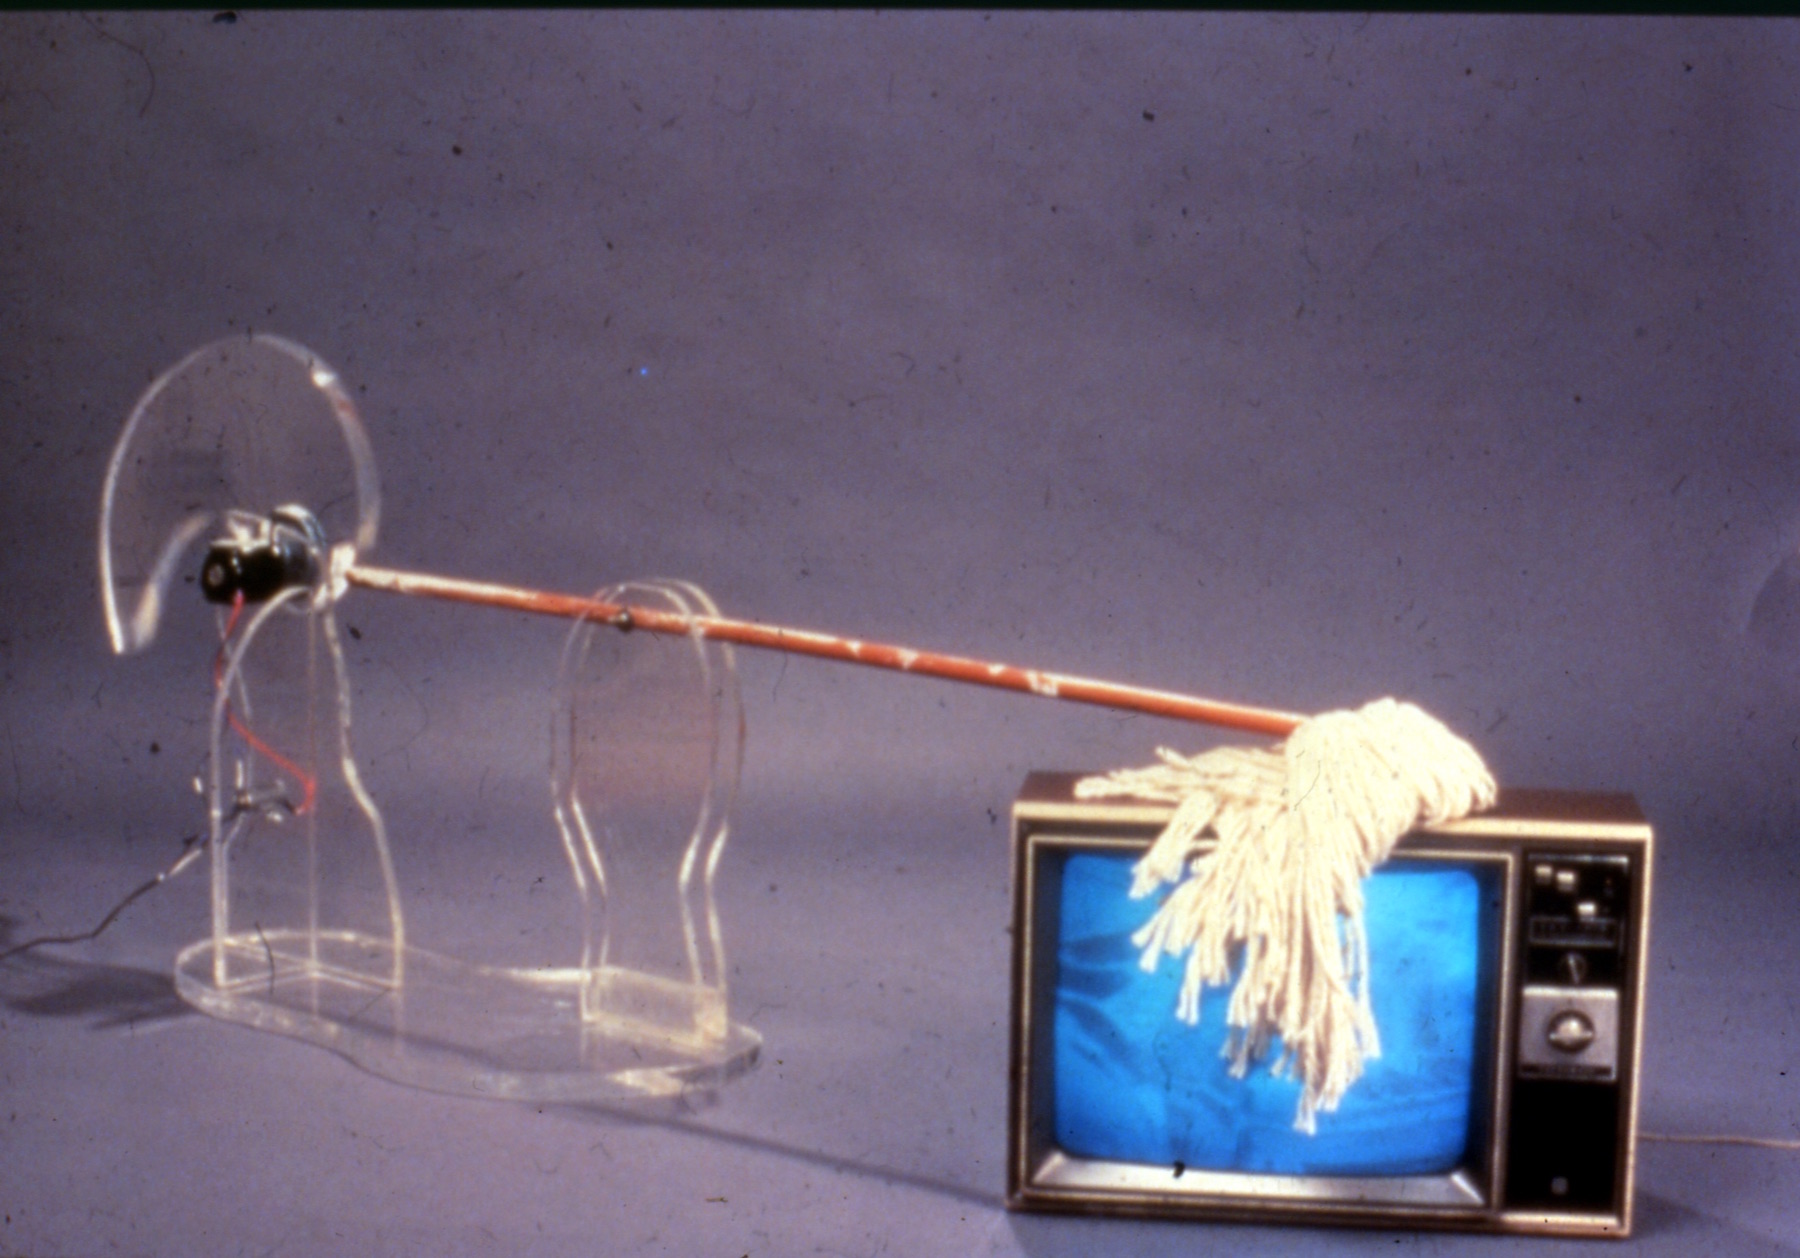 mop with motor repeatedly hitting television